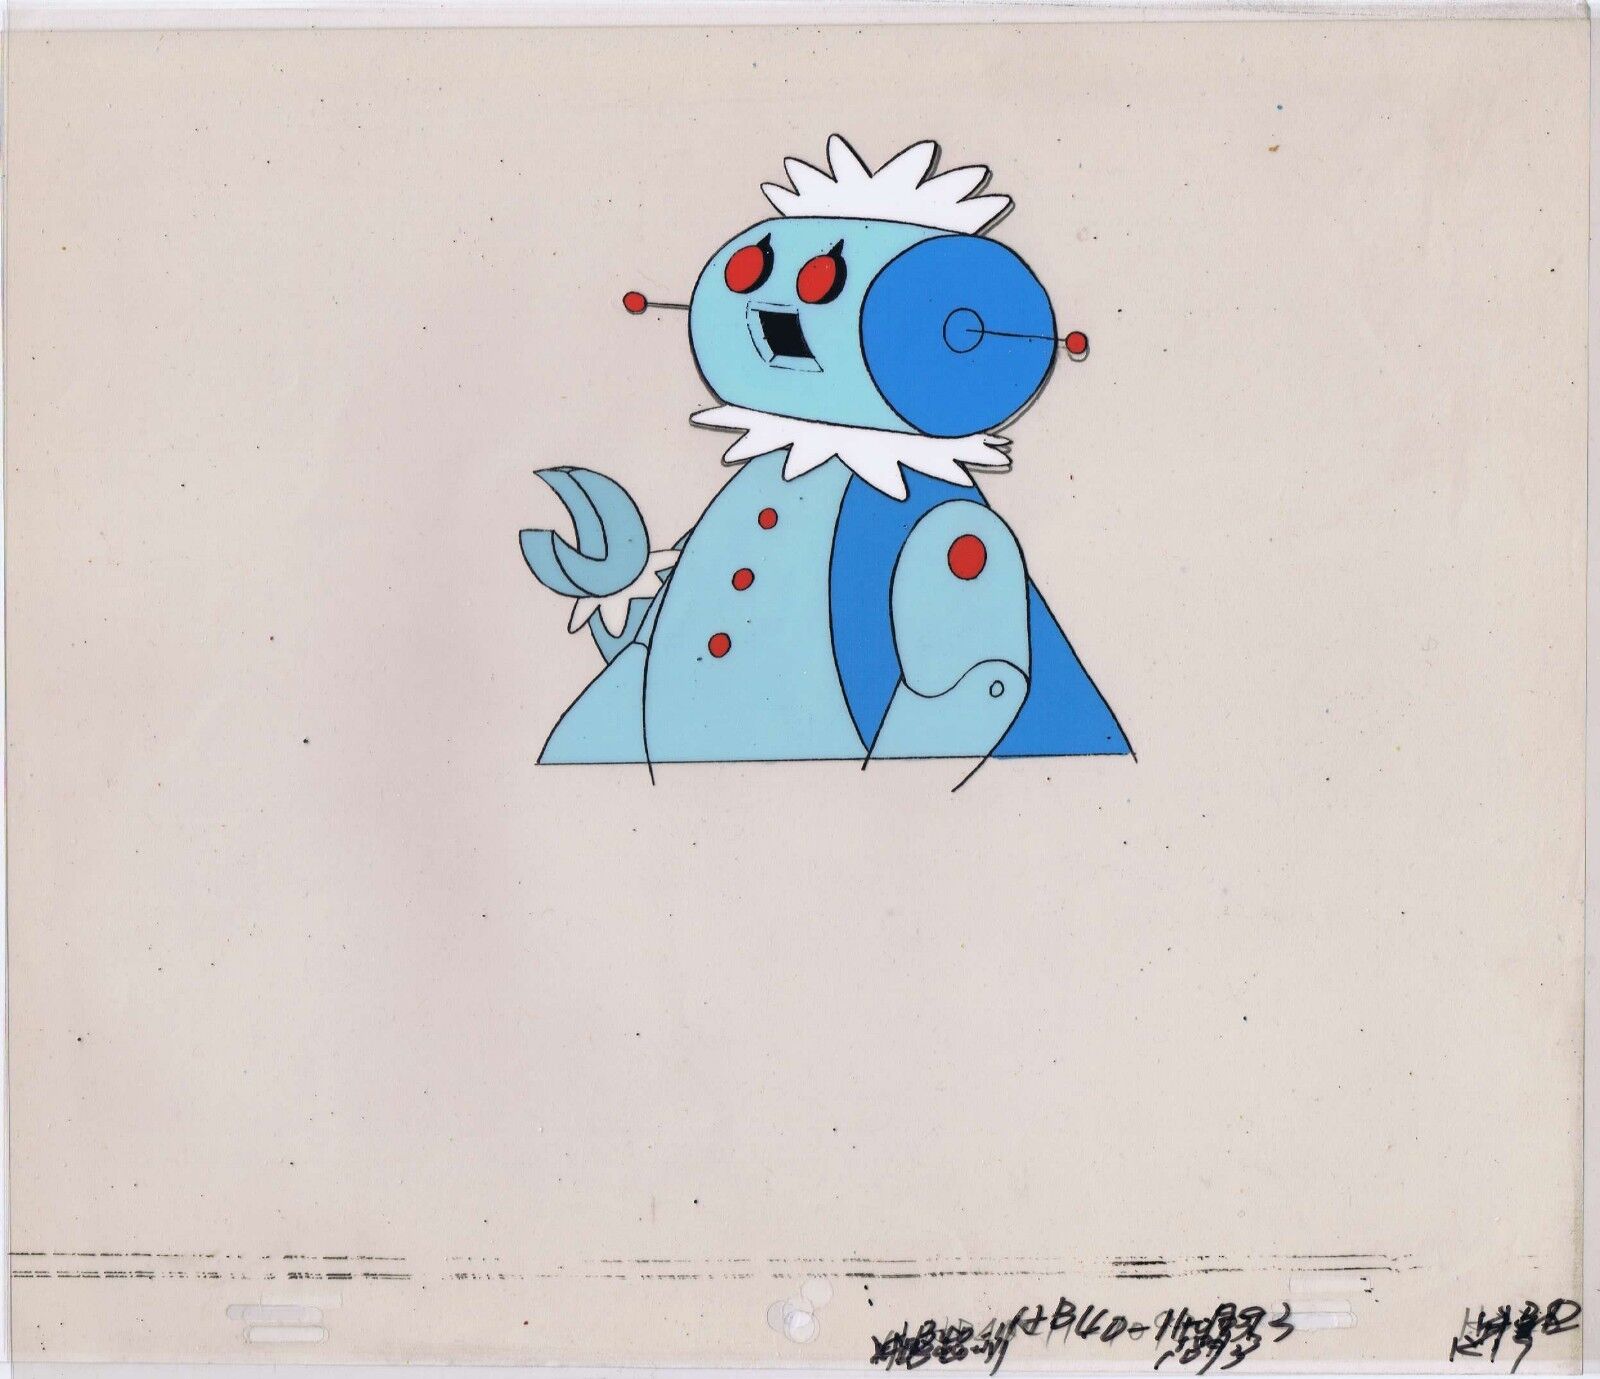 The Jetsons Rosie the Robot Original Production Cels and Original Art Pencil 